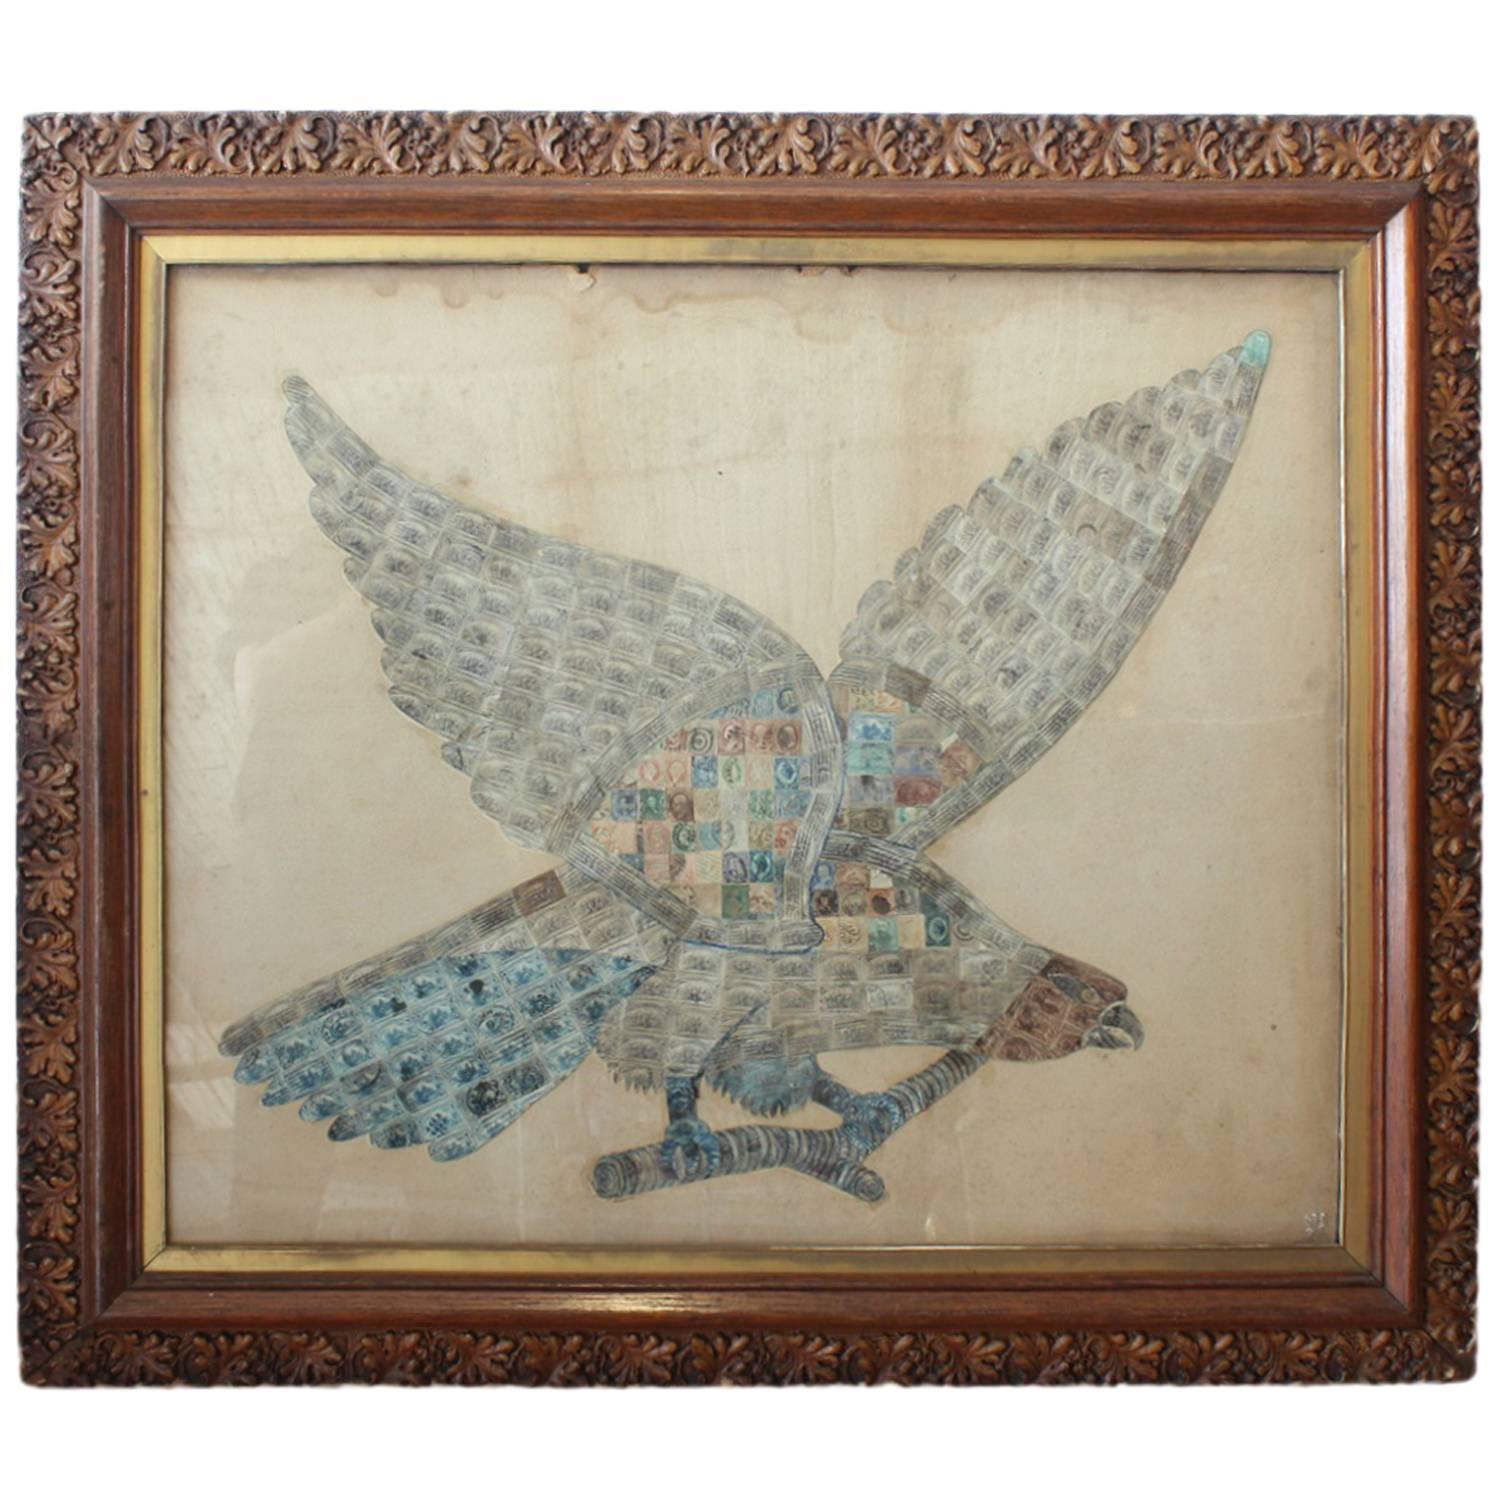 1900s American Stamp Eagle Collage